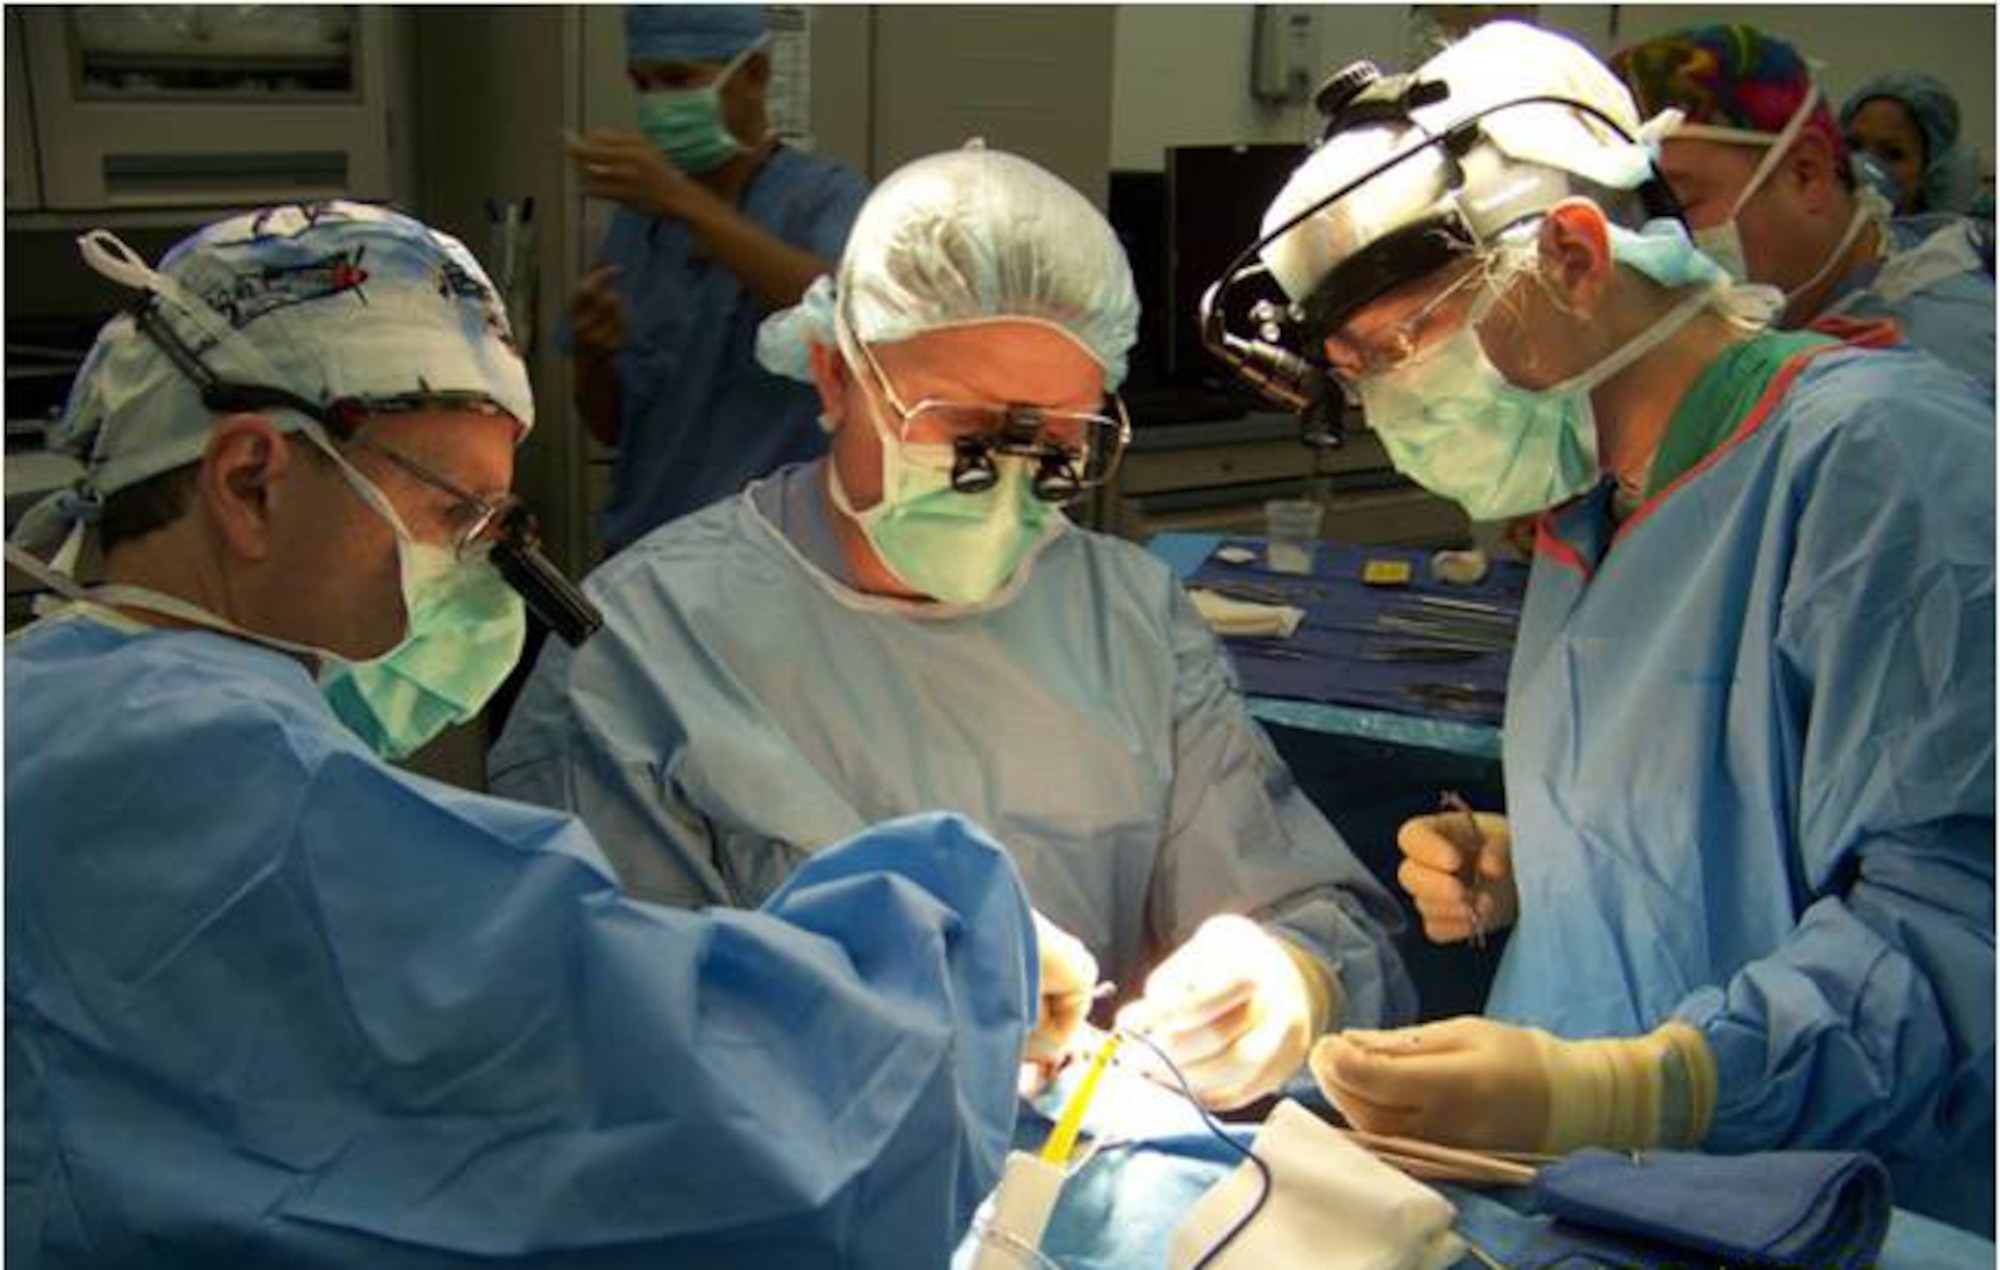 Ophthalmologists Col. (Dr.) Randy Beatty, Maj. (Dr.) Lisa Mihora, and Col. (Dr.) David Holck (left to right) repair an orbital fracture at the Air Force Theater Hospital, Joint Base Balad, Iraq, June 20, 2008.  Major Mihora, an oculoplastics fellow at Wilford Hall Medical Center, Lackland Air Force Base, Texas, spent six weeks in Iraq as part of her training. (U.S. Air Force photo)